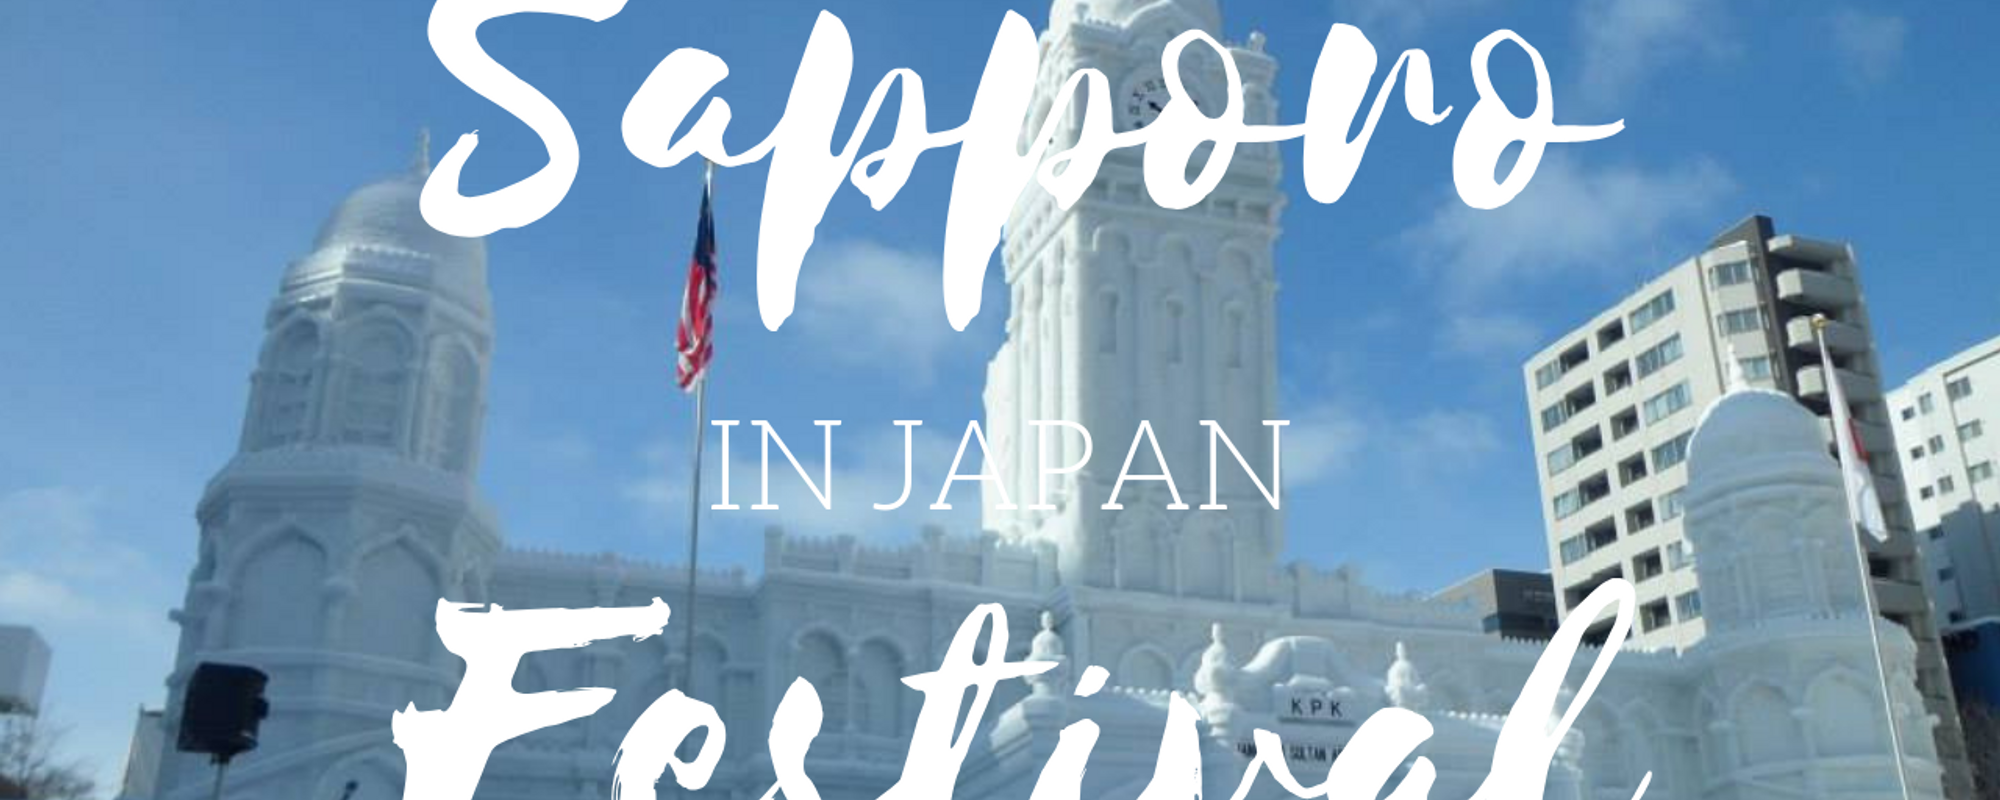 How to make the most of the Sapporo Snow Festival - JAPAN